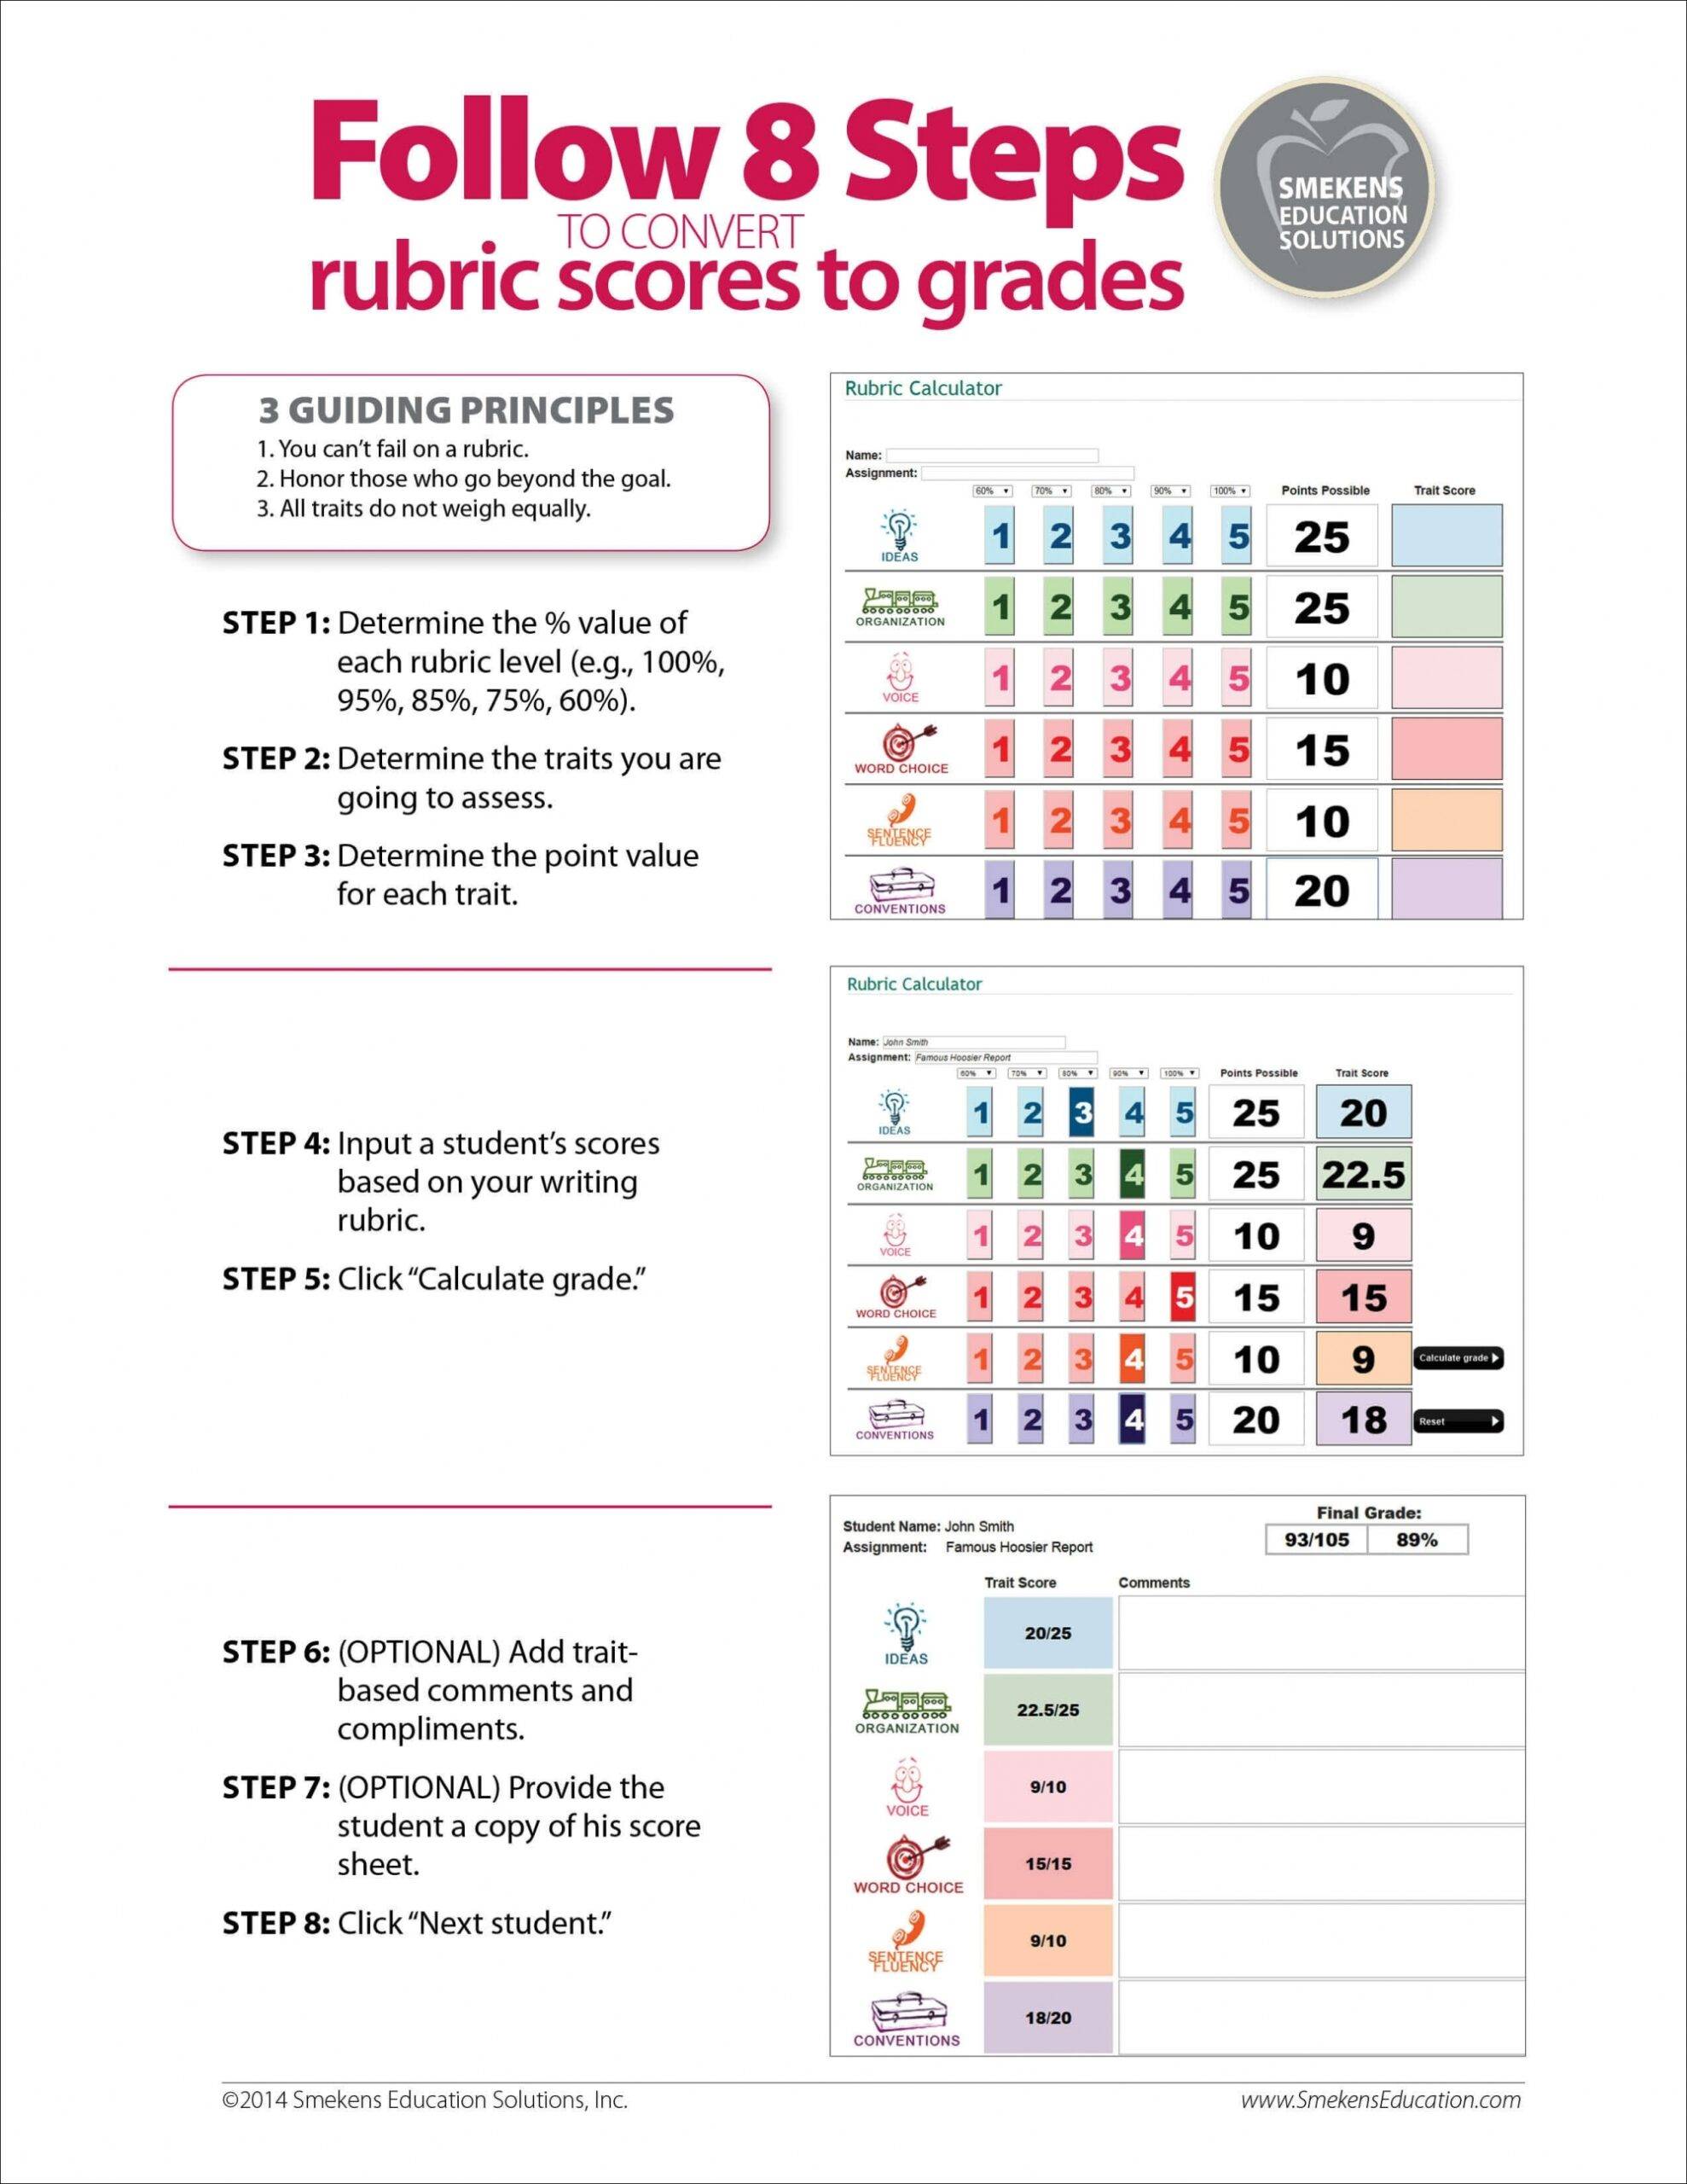 Follow 8 Steps to Convert Rubric Scores to Grades